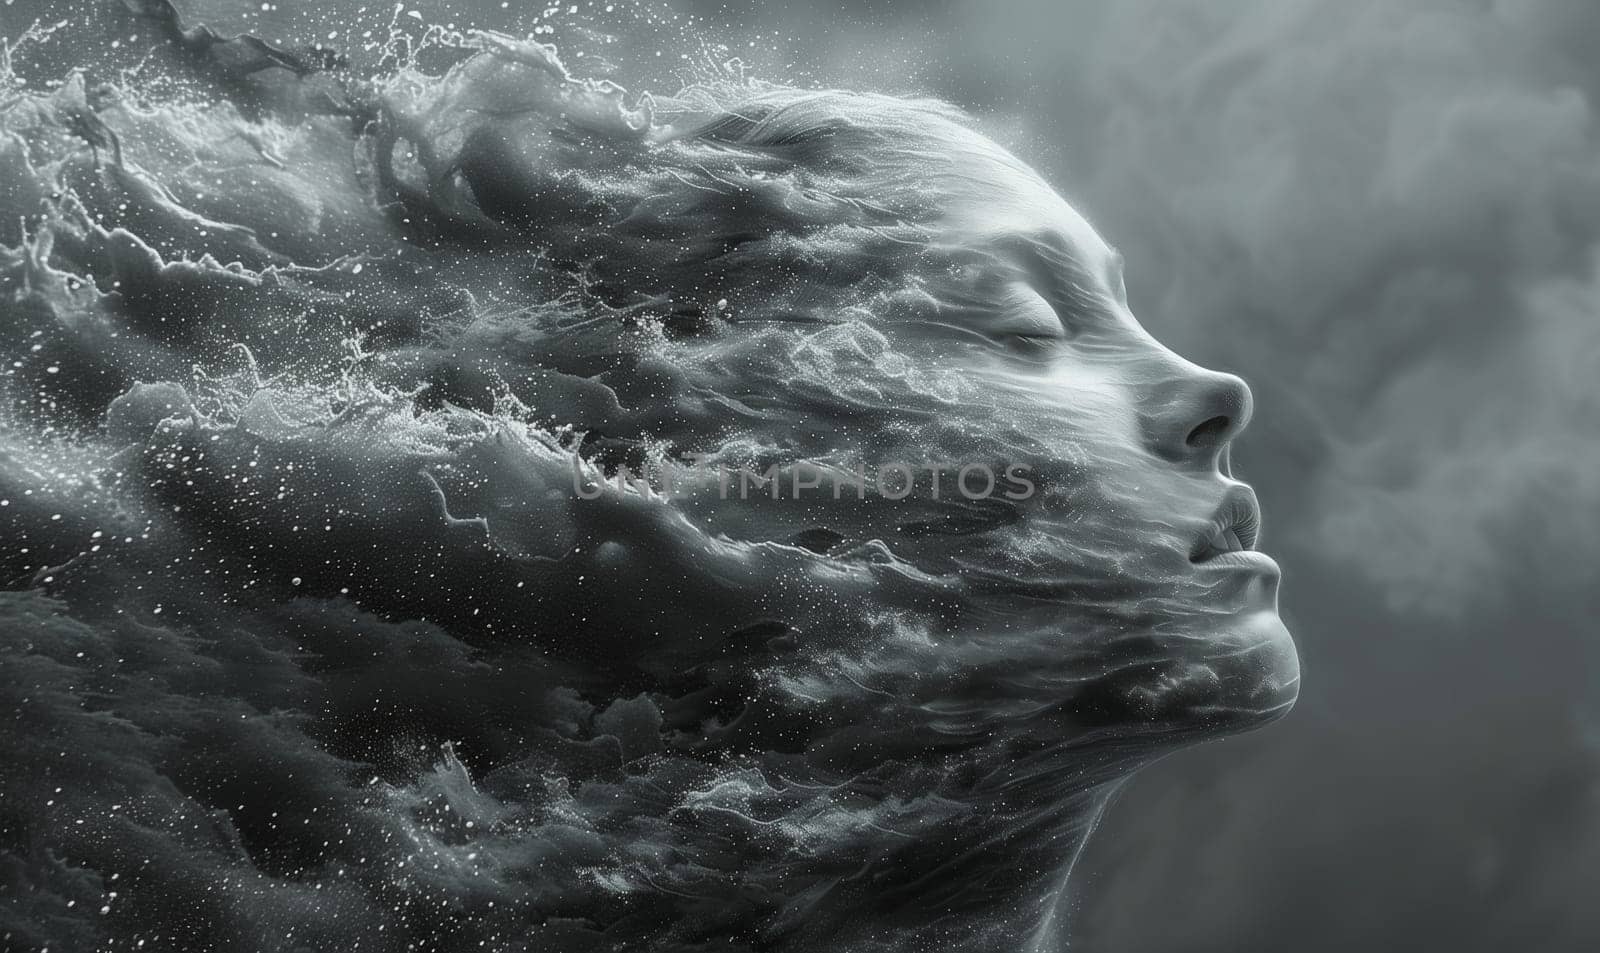 Abstract image of a woman with flowing hair, in monochrome image. by Fischeron